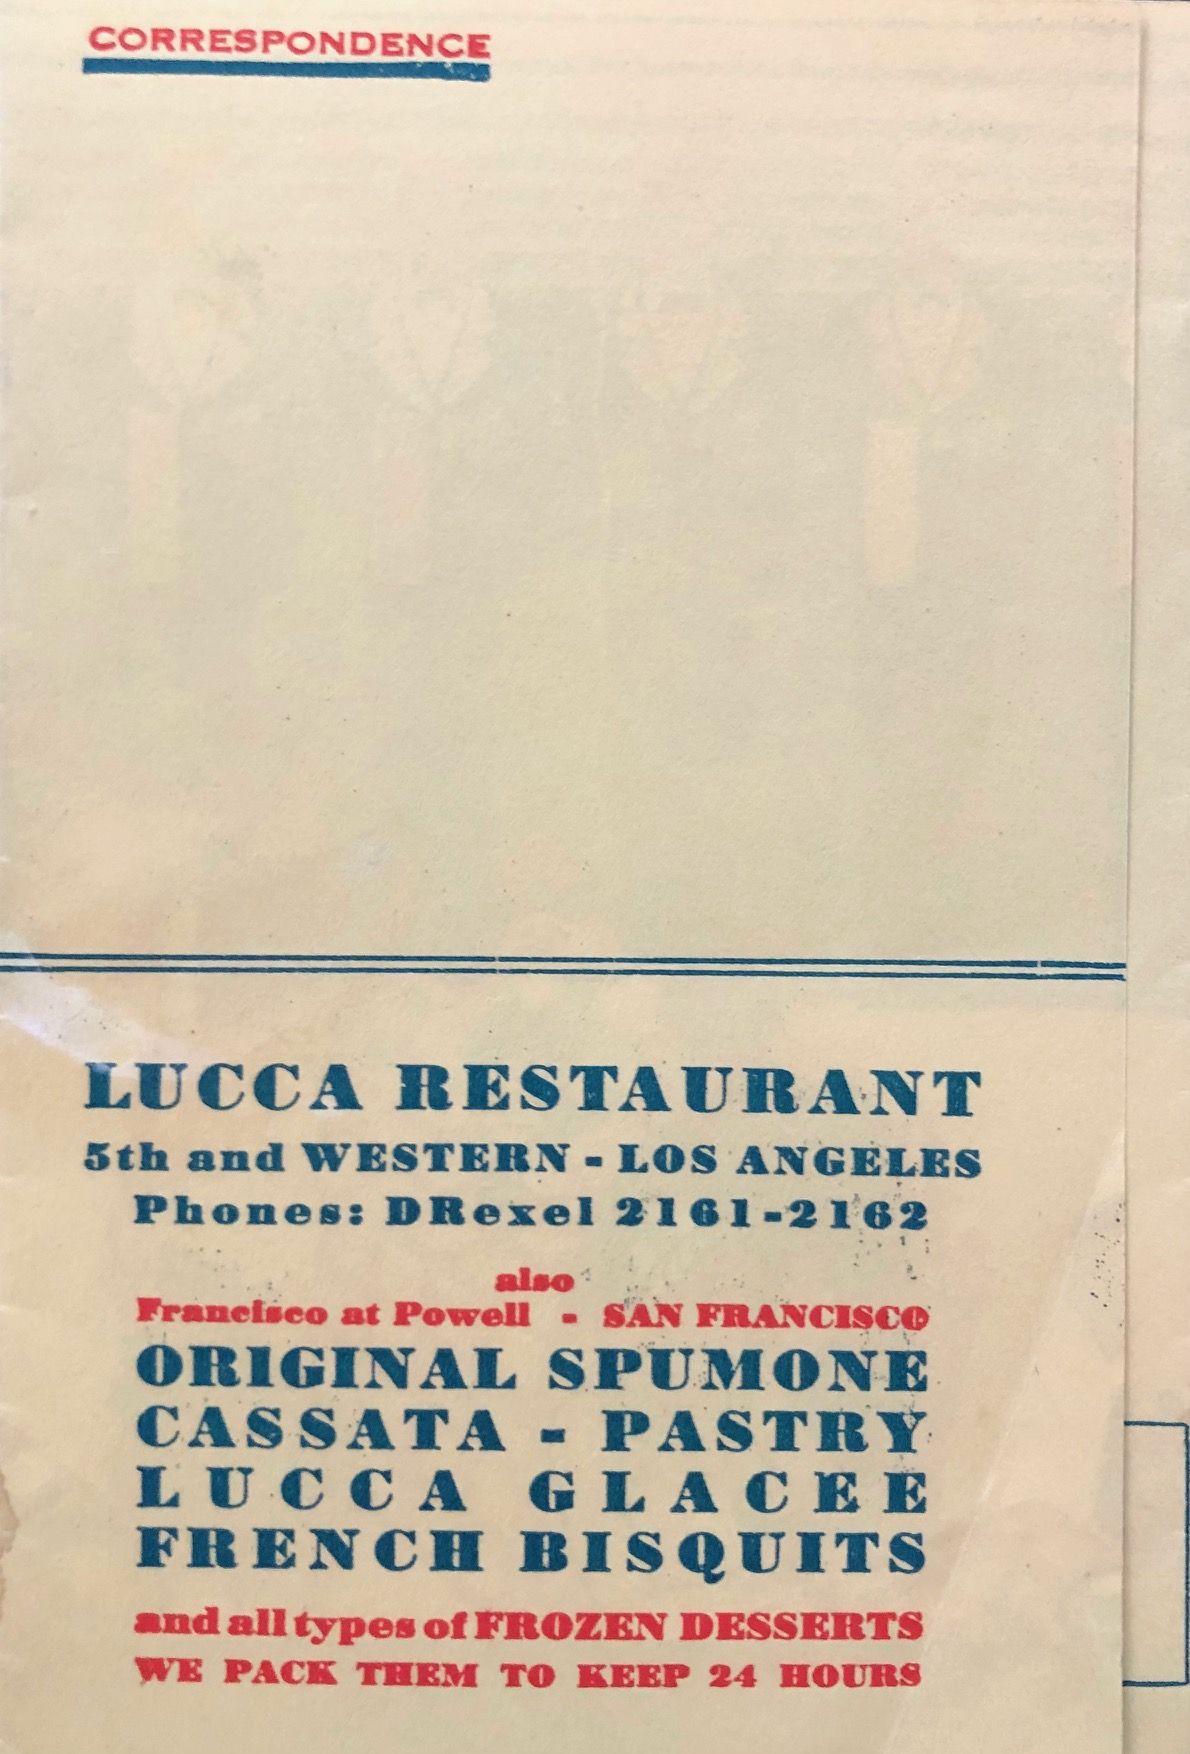 *NEW* Lucca Restaurant. In London They Talk About Lucca's Menu